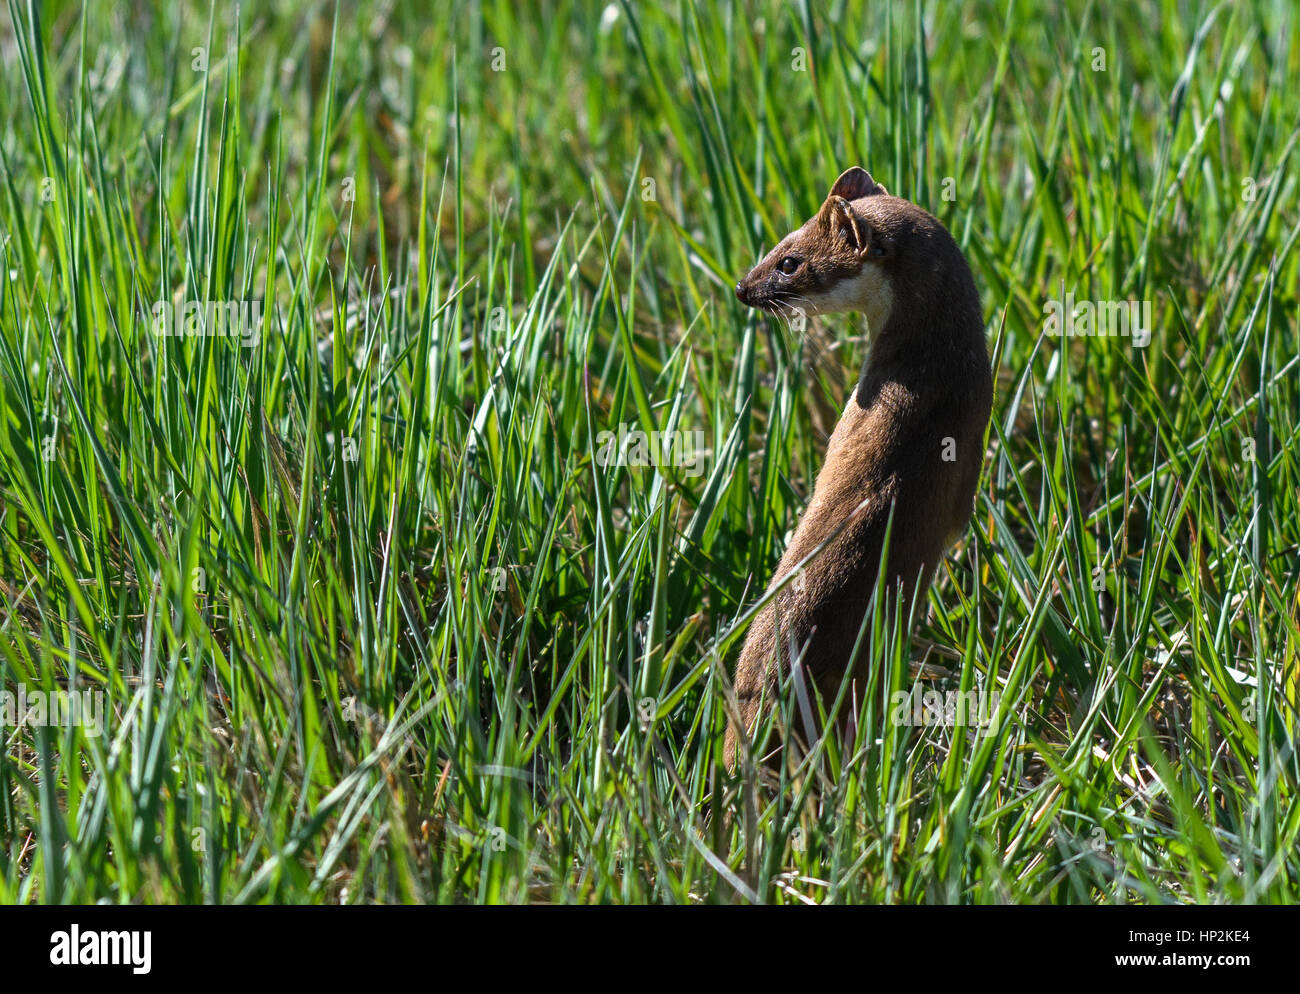 A Short-tailed Weasel on the Plains of Colorado Stock Photo